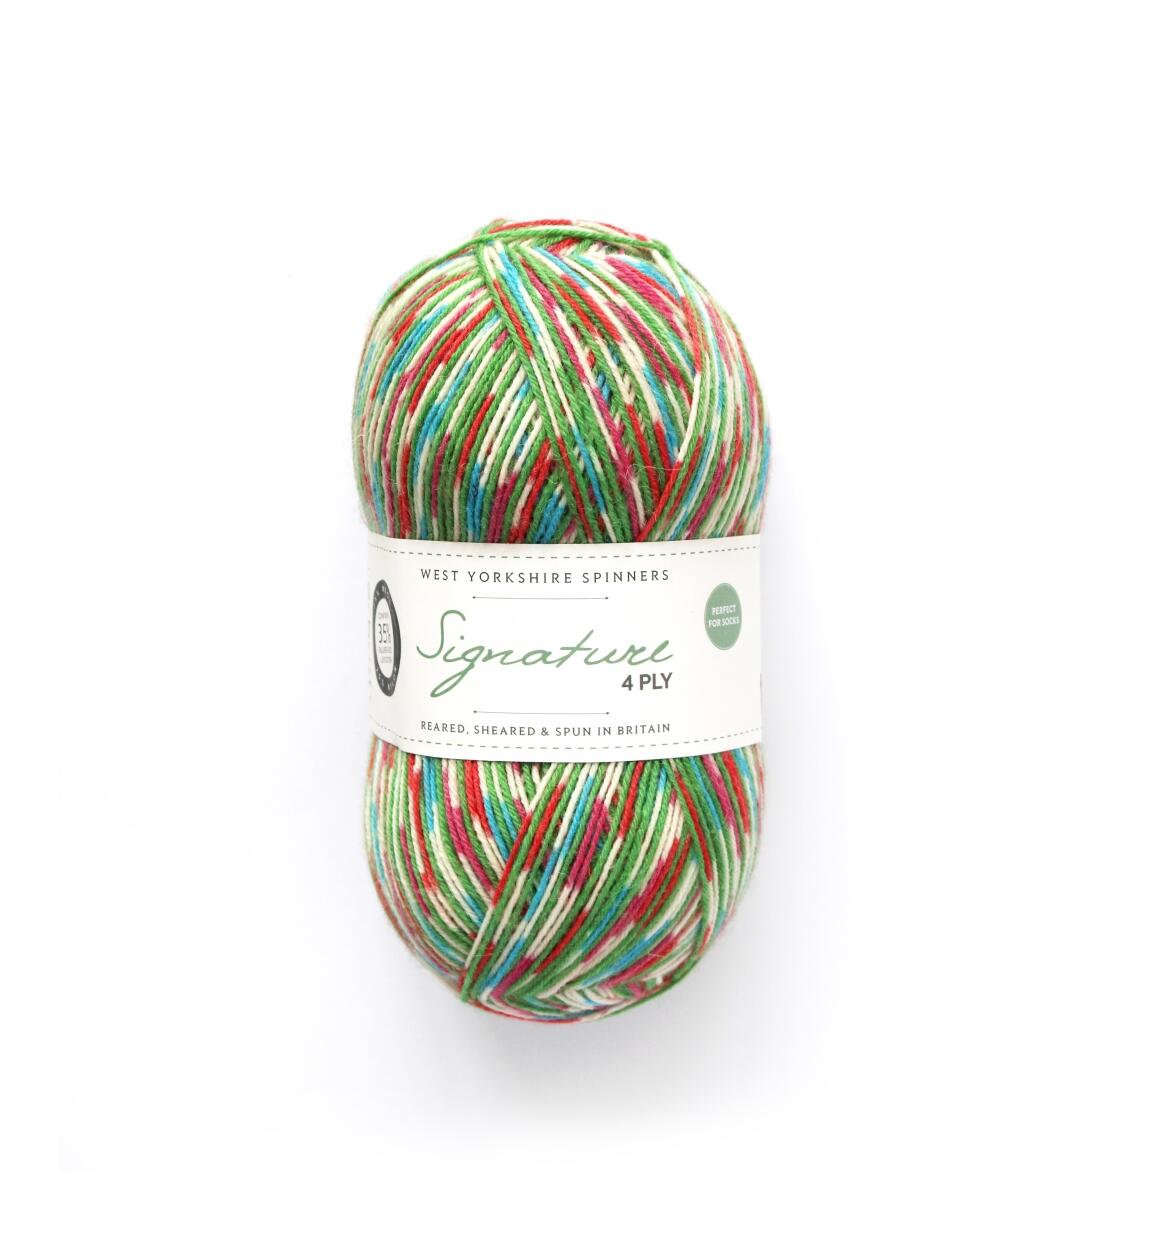 West Yorkshire Spinners Signature 4ply "Fairy Tales" 100g